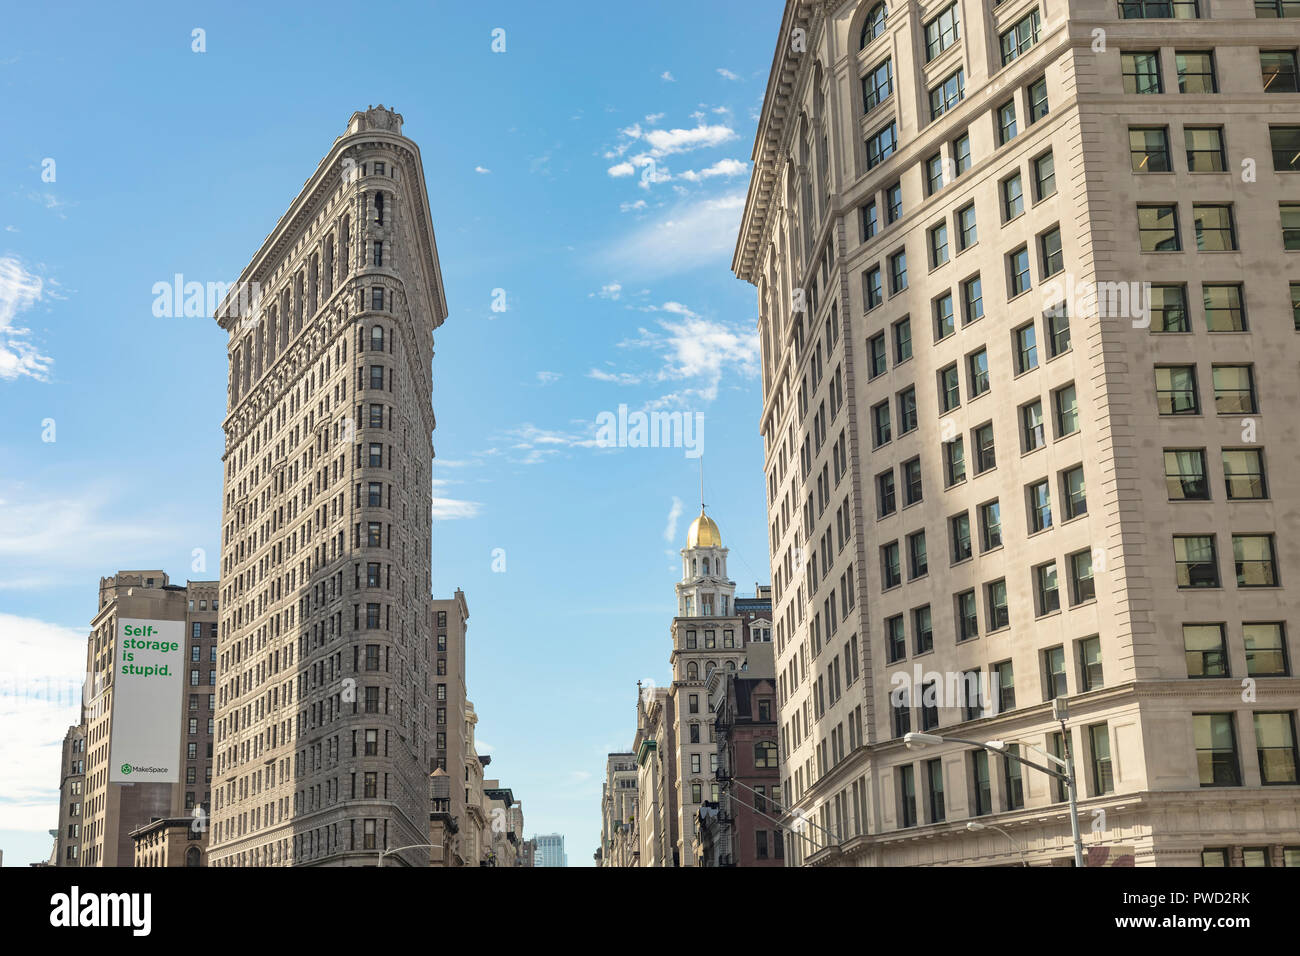 New York City, USA - October 10, 2017: Street view of the Flatiron building in the city of New York, USA. Stock Photo